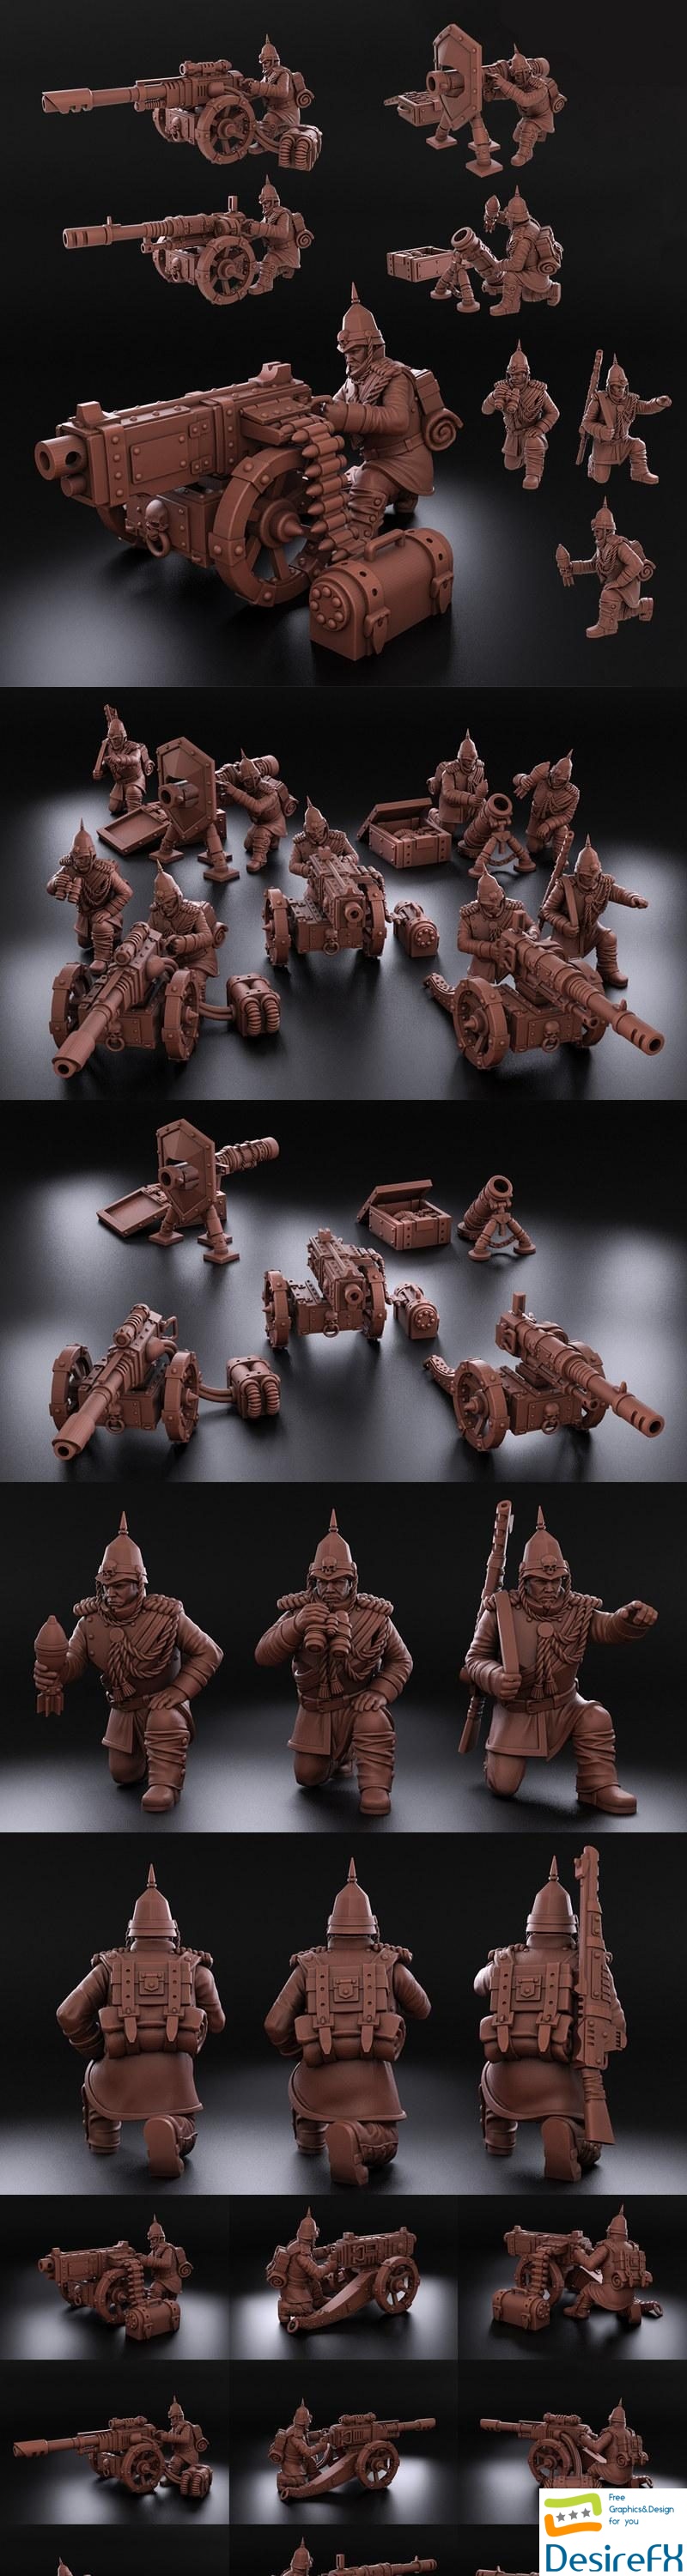 Royal Regiment - Heavy Support Squad of the Imperial Force - 3D Print